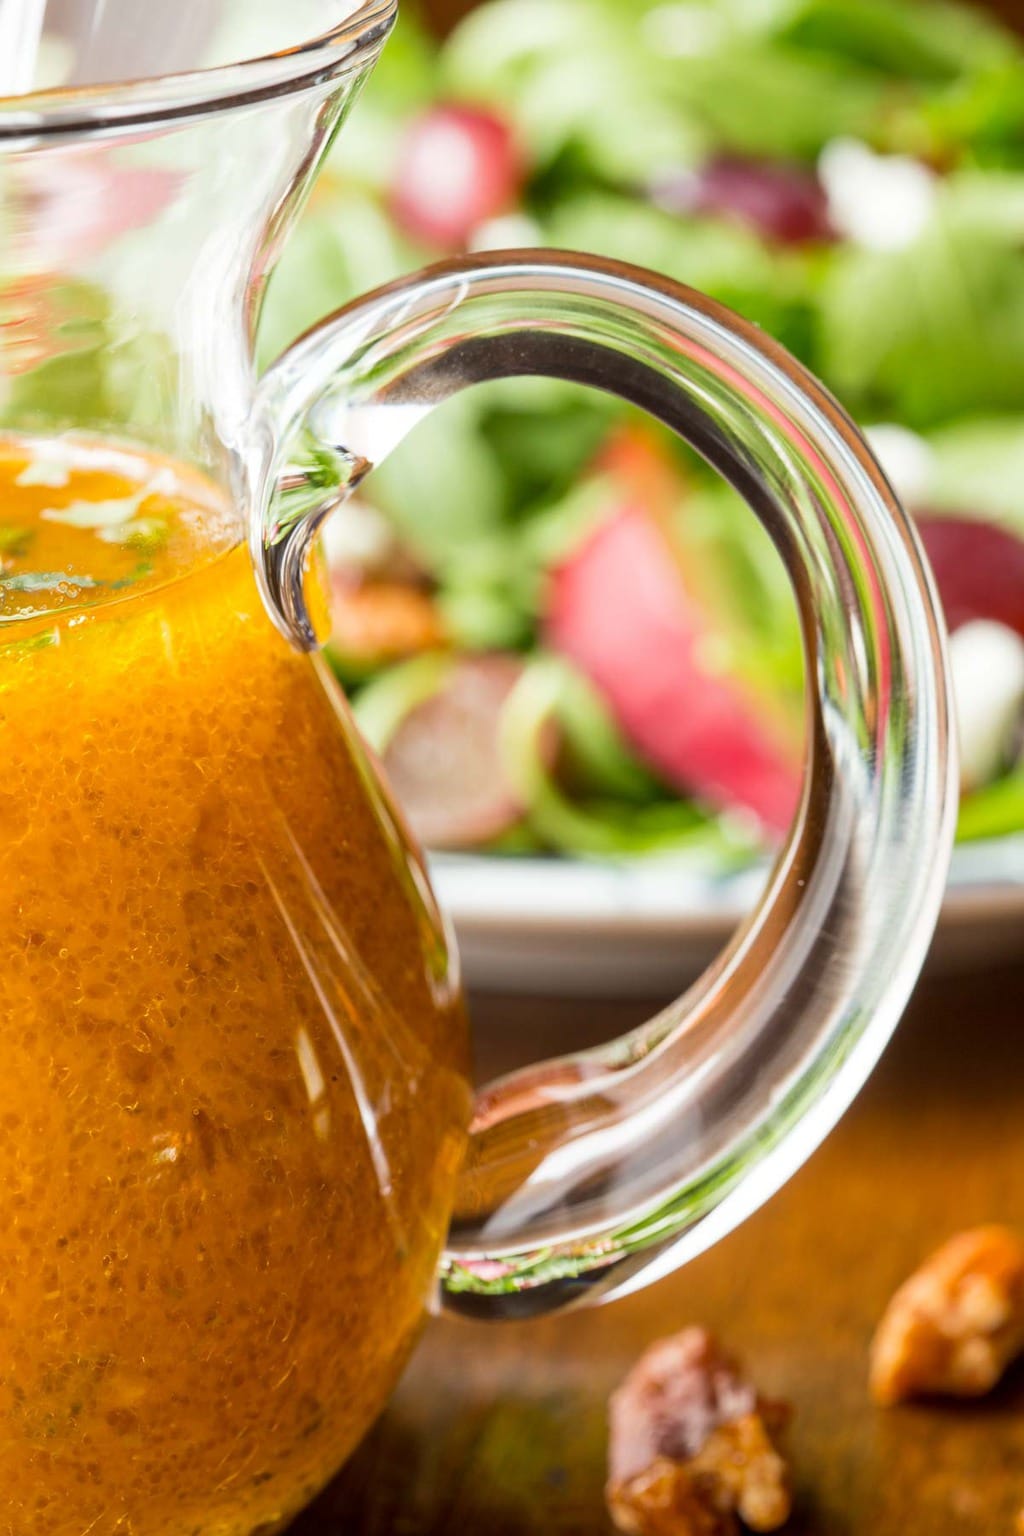 Ultra closeup photo of a glass pitcher of Pumpkin Maple Vinaigrette with a fall apple salad in the background.